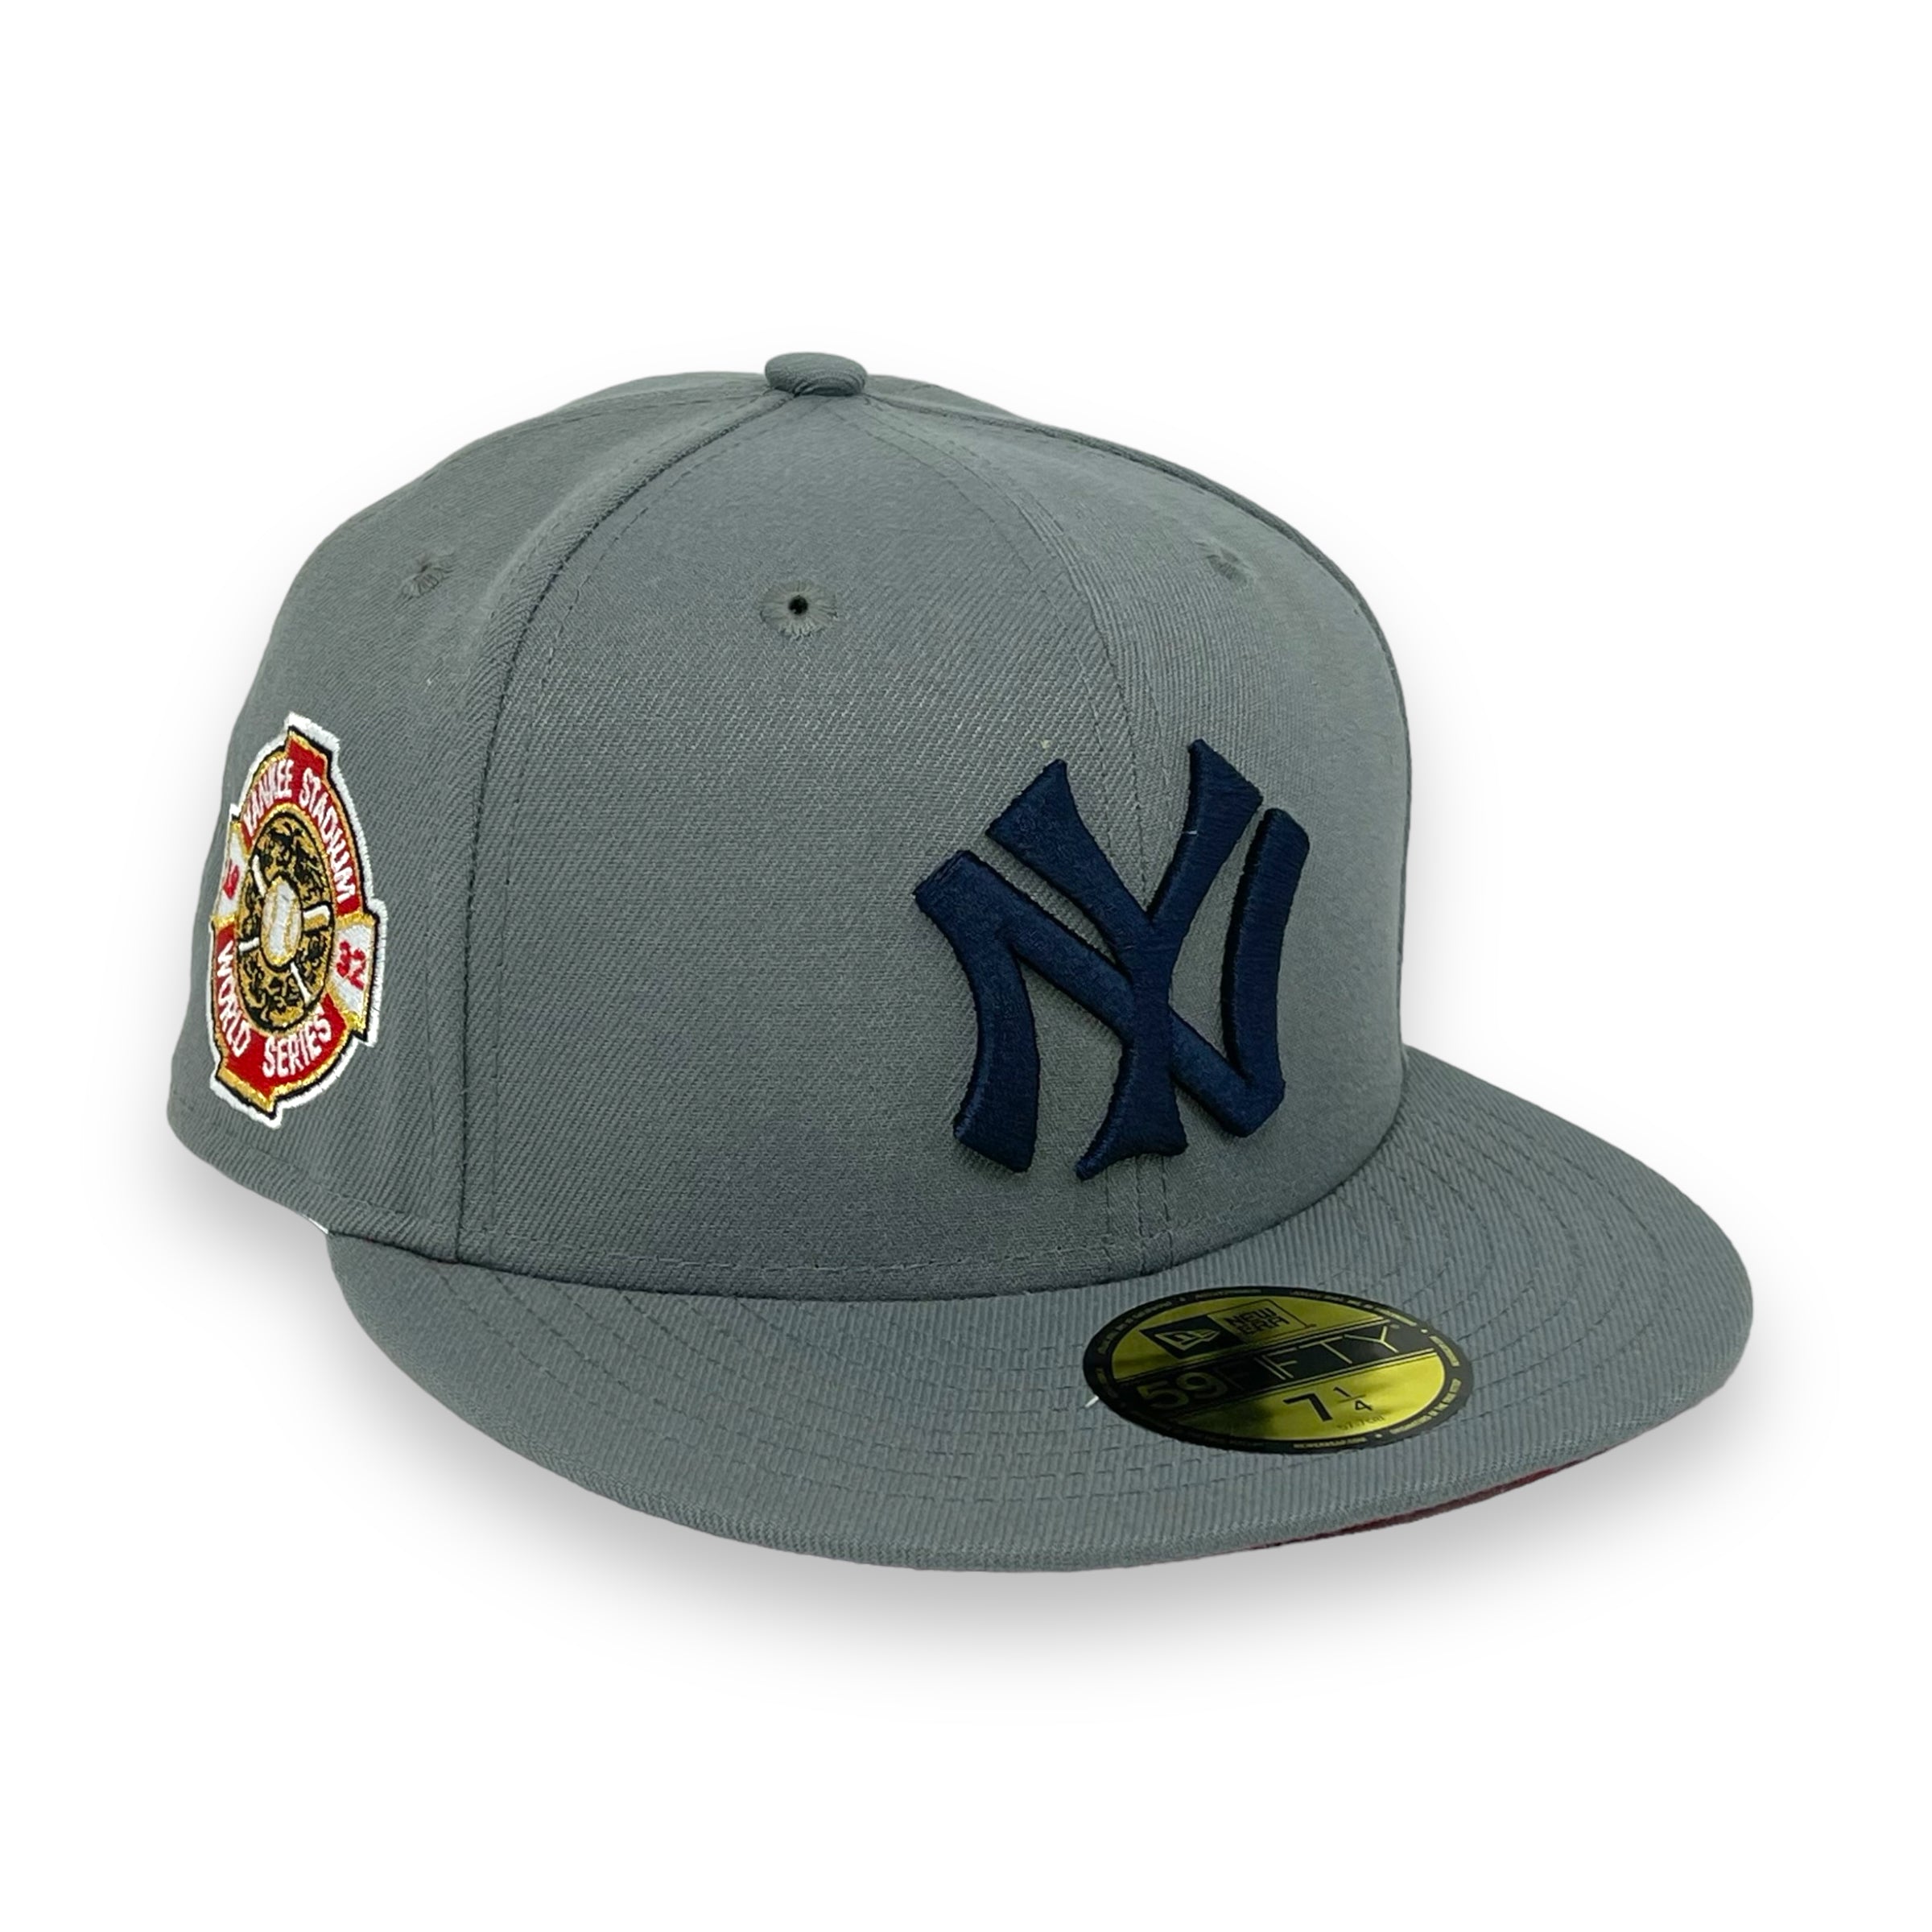 NEW YORK YANKEES (S-GREY) (1932 WORLD SERIES) NEW ERA 59FIFTY FITTED (RED UNDER VISOR)